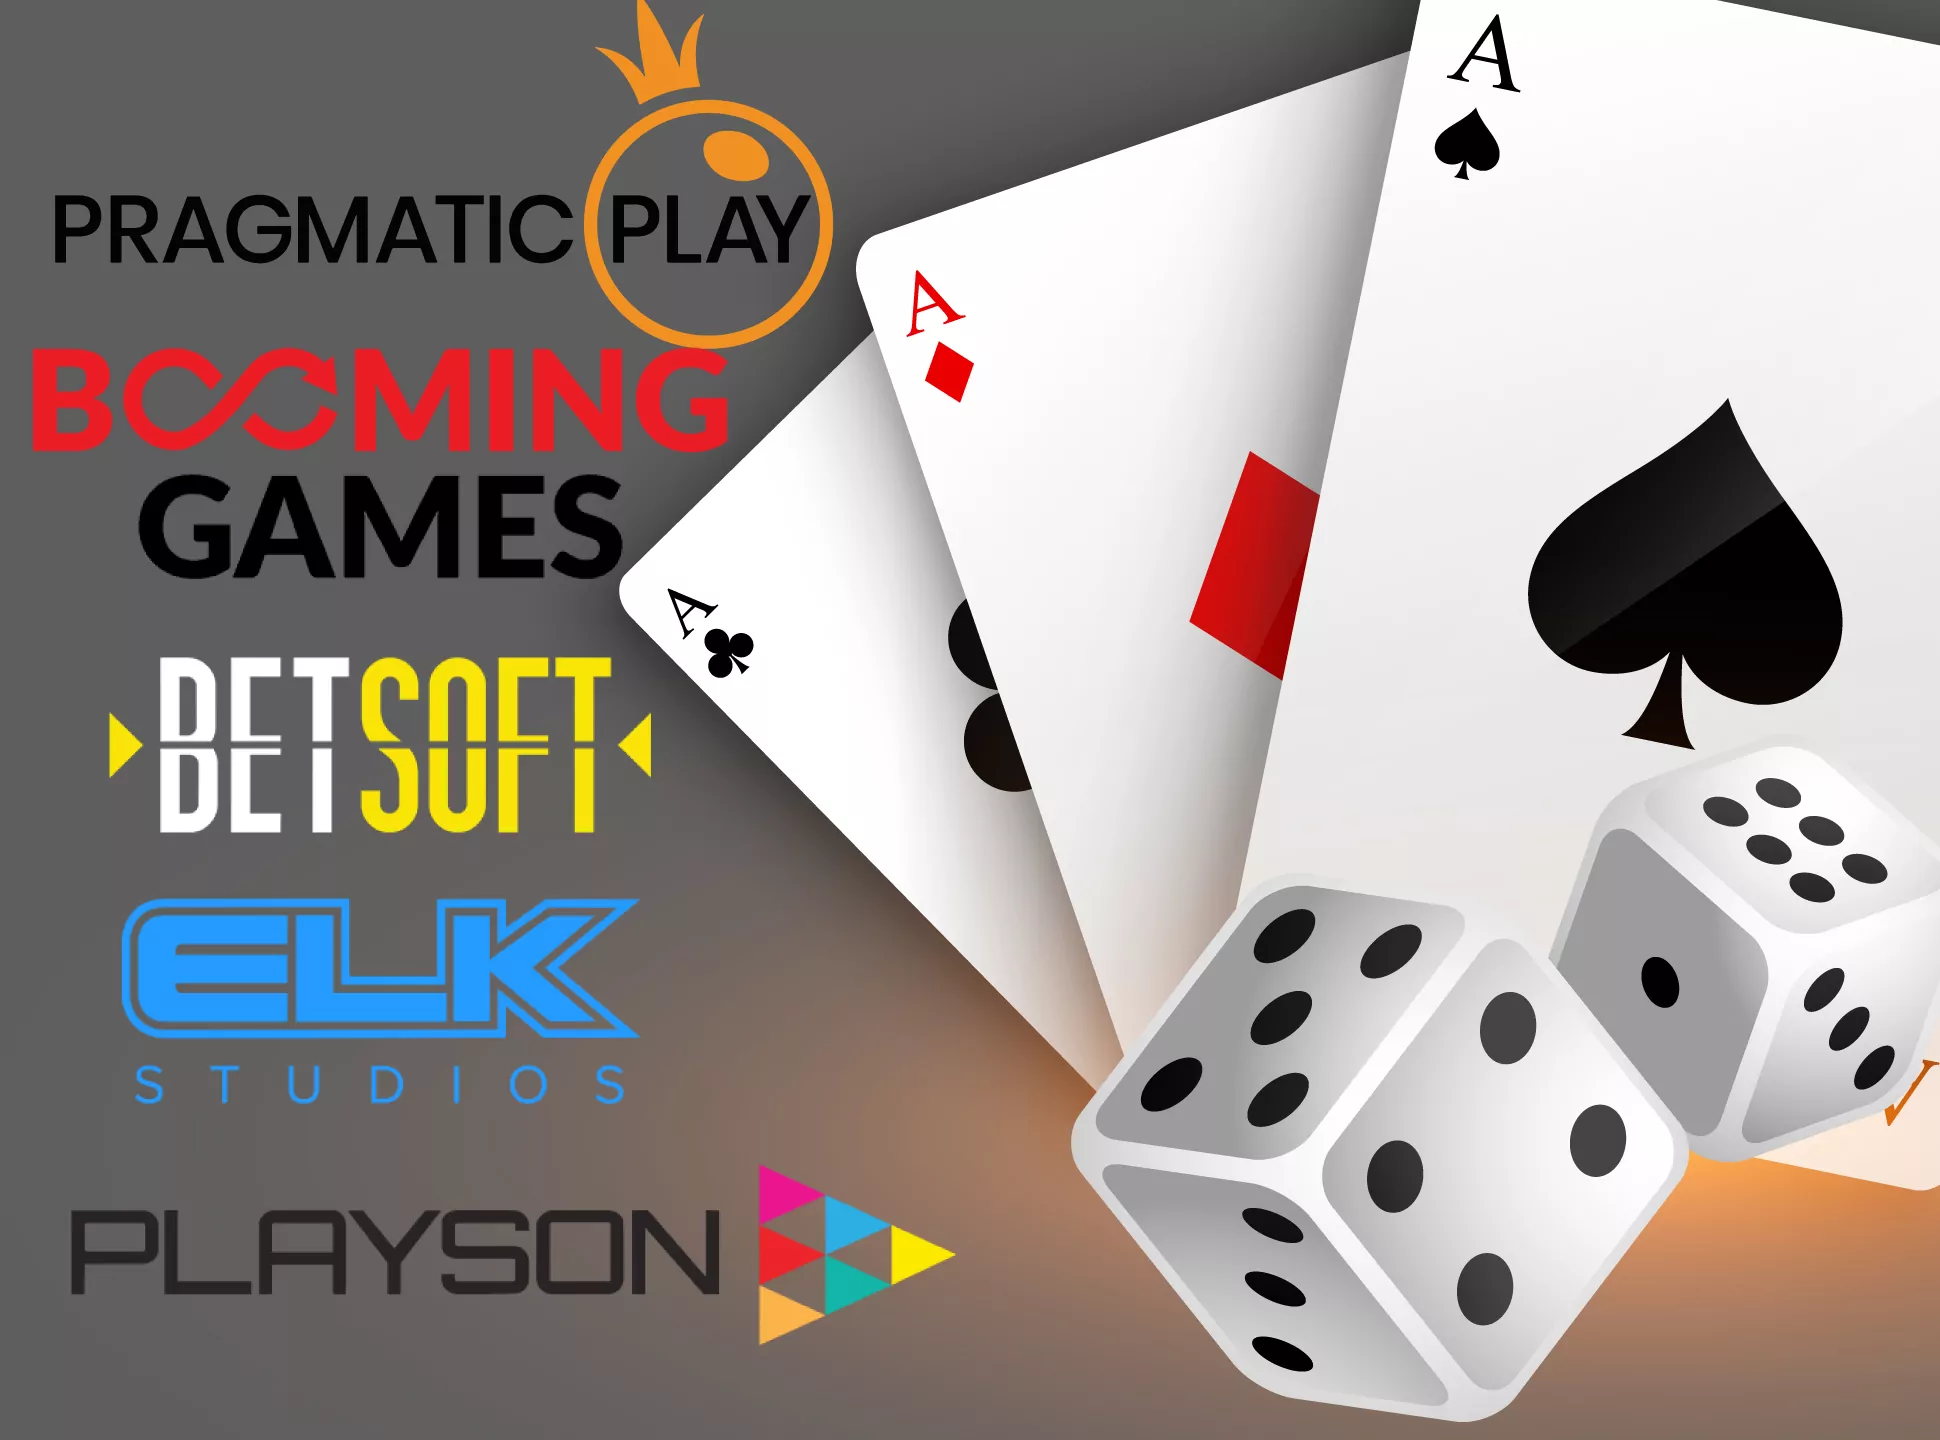 You will find varios casino games from these providers in the casino apps.